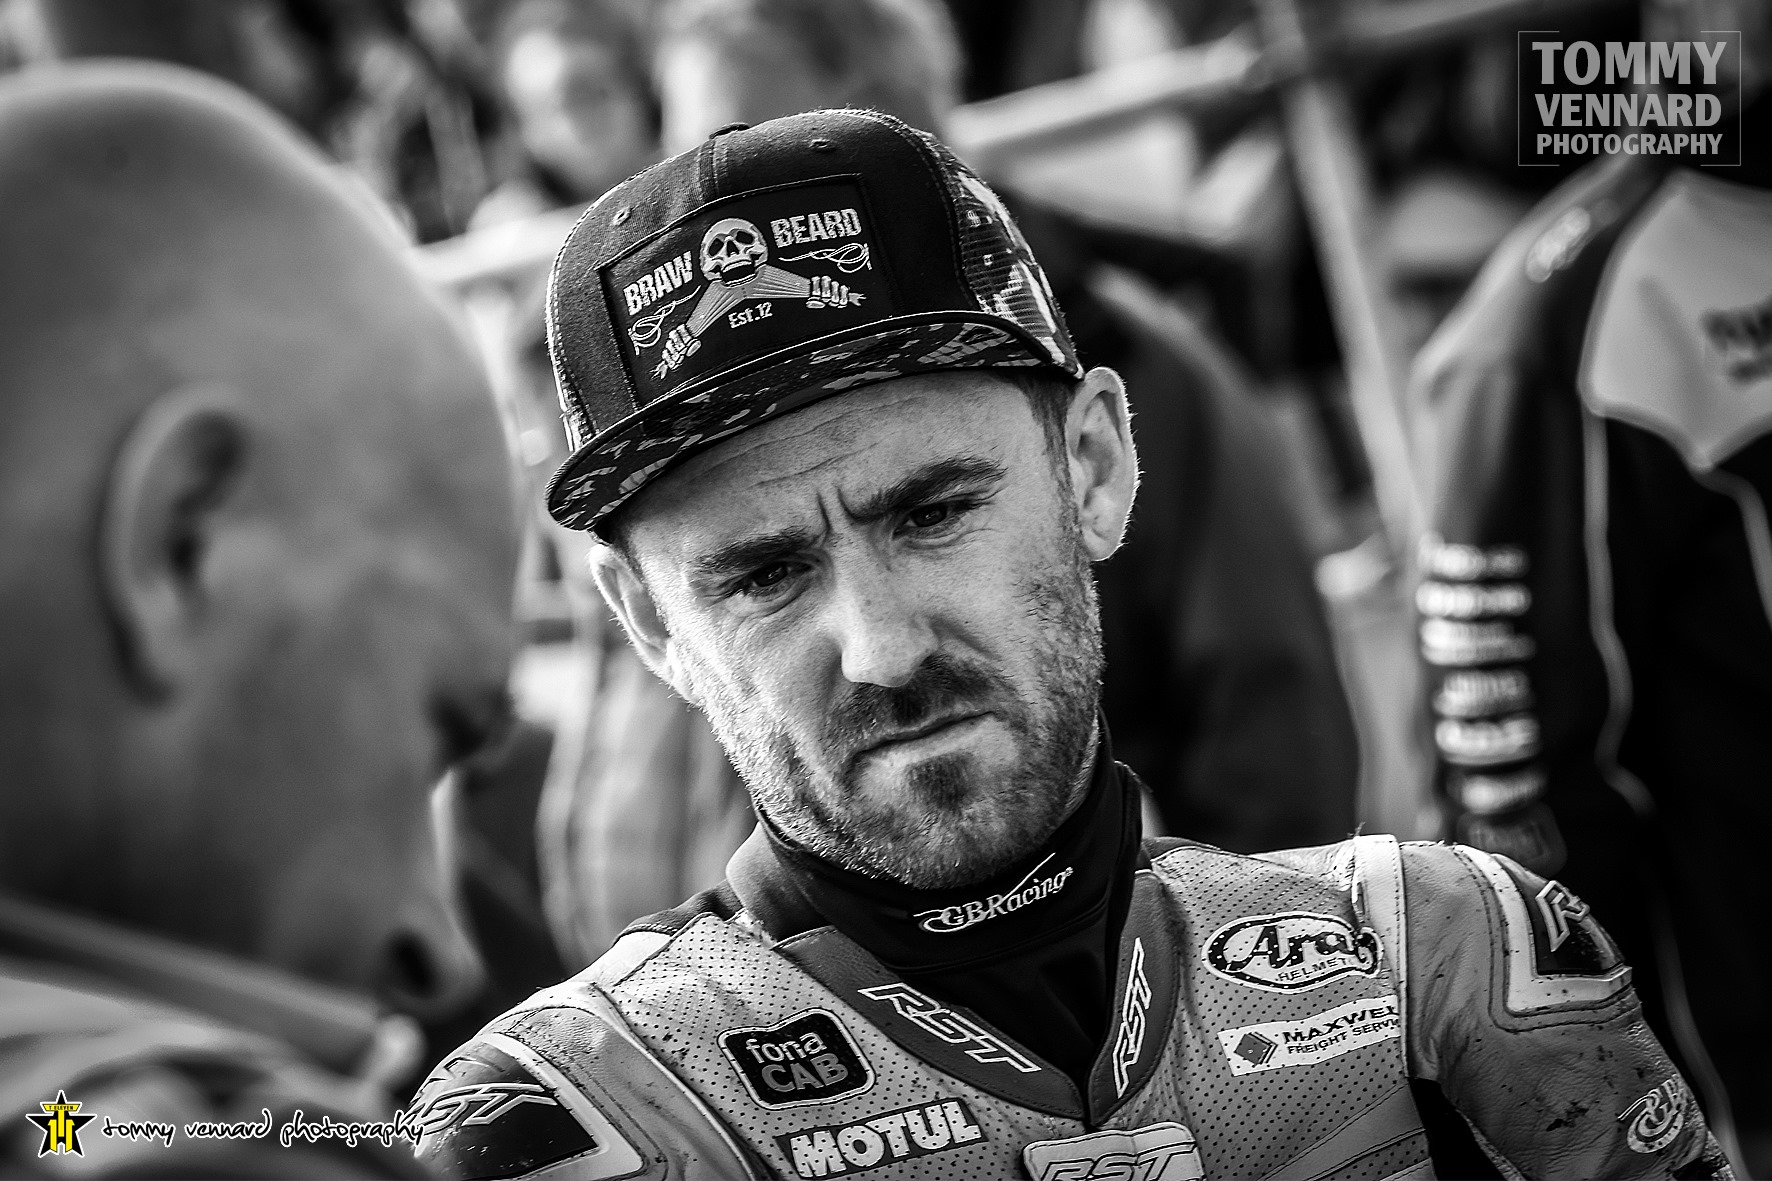 Road Racer’s Adventures – BSB Final Round: Day 3 Wrap Up